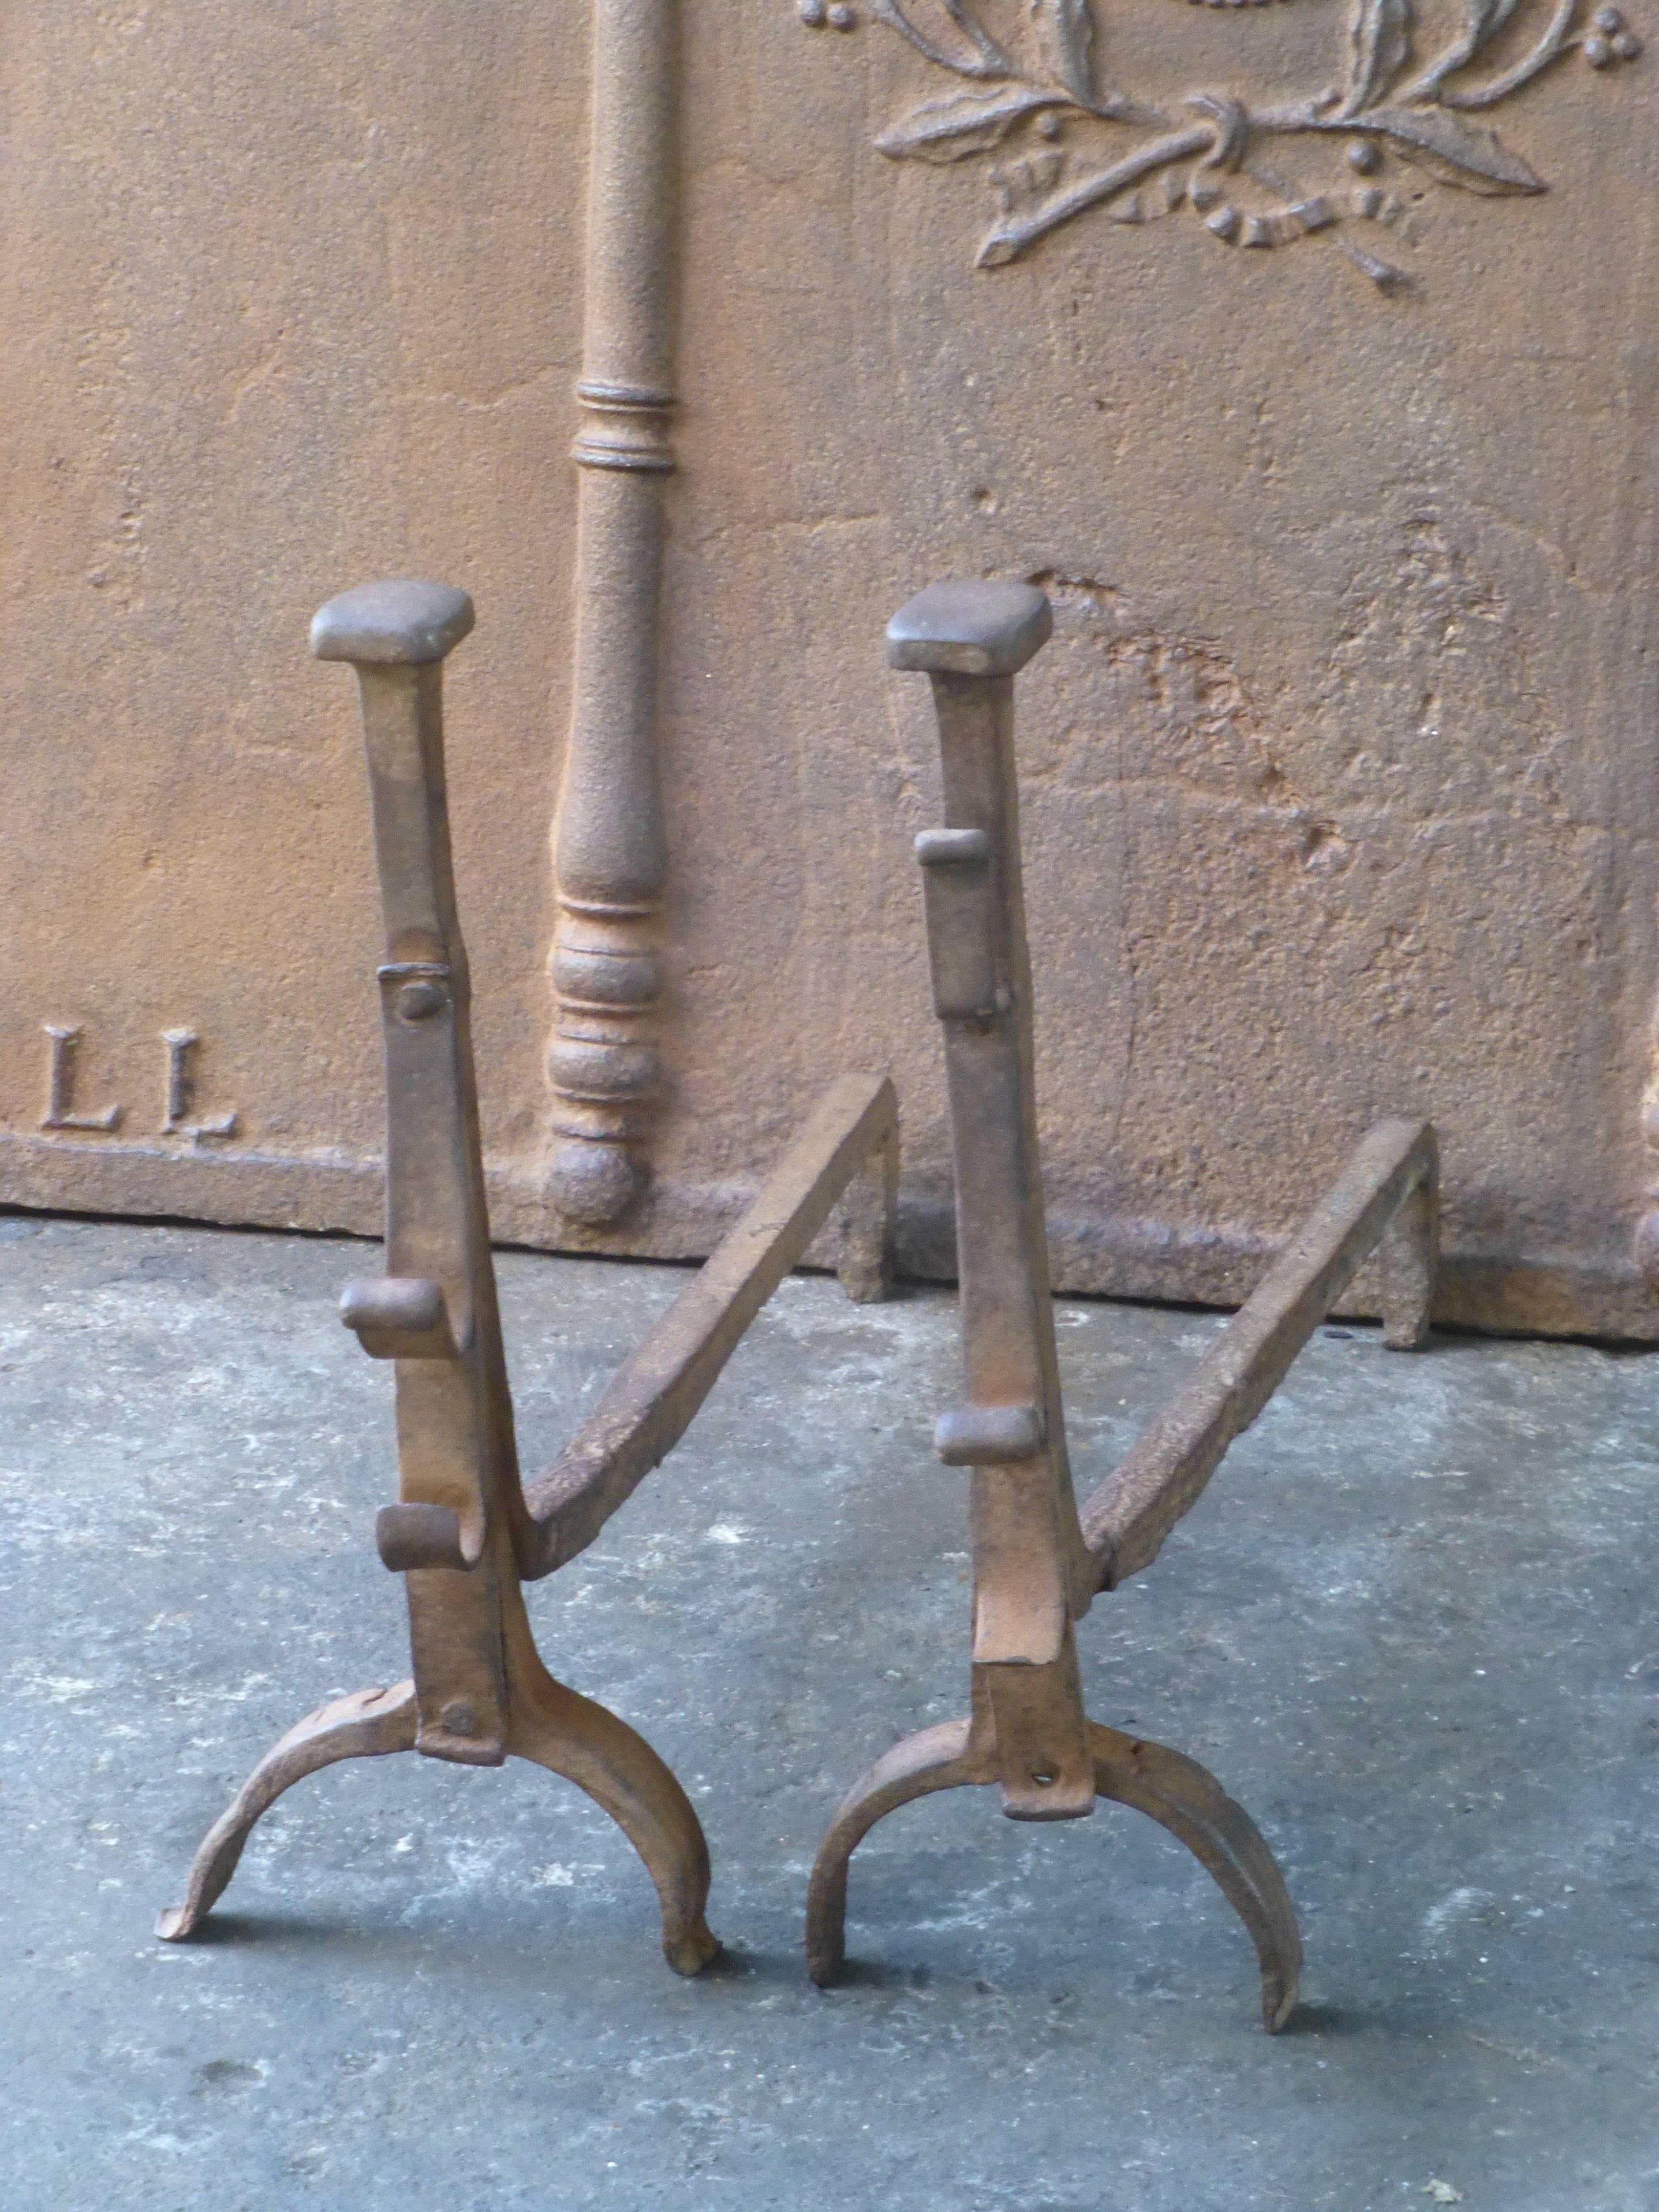 17th century French andirons - fire dogs. Made of wrought iron.

 

 